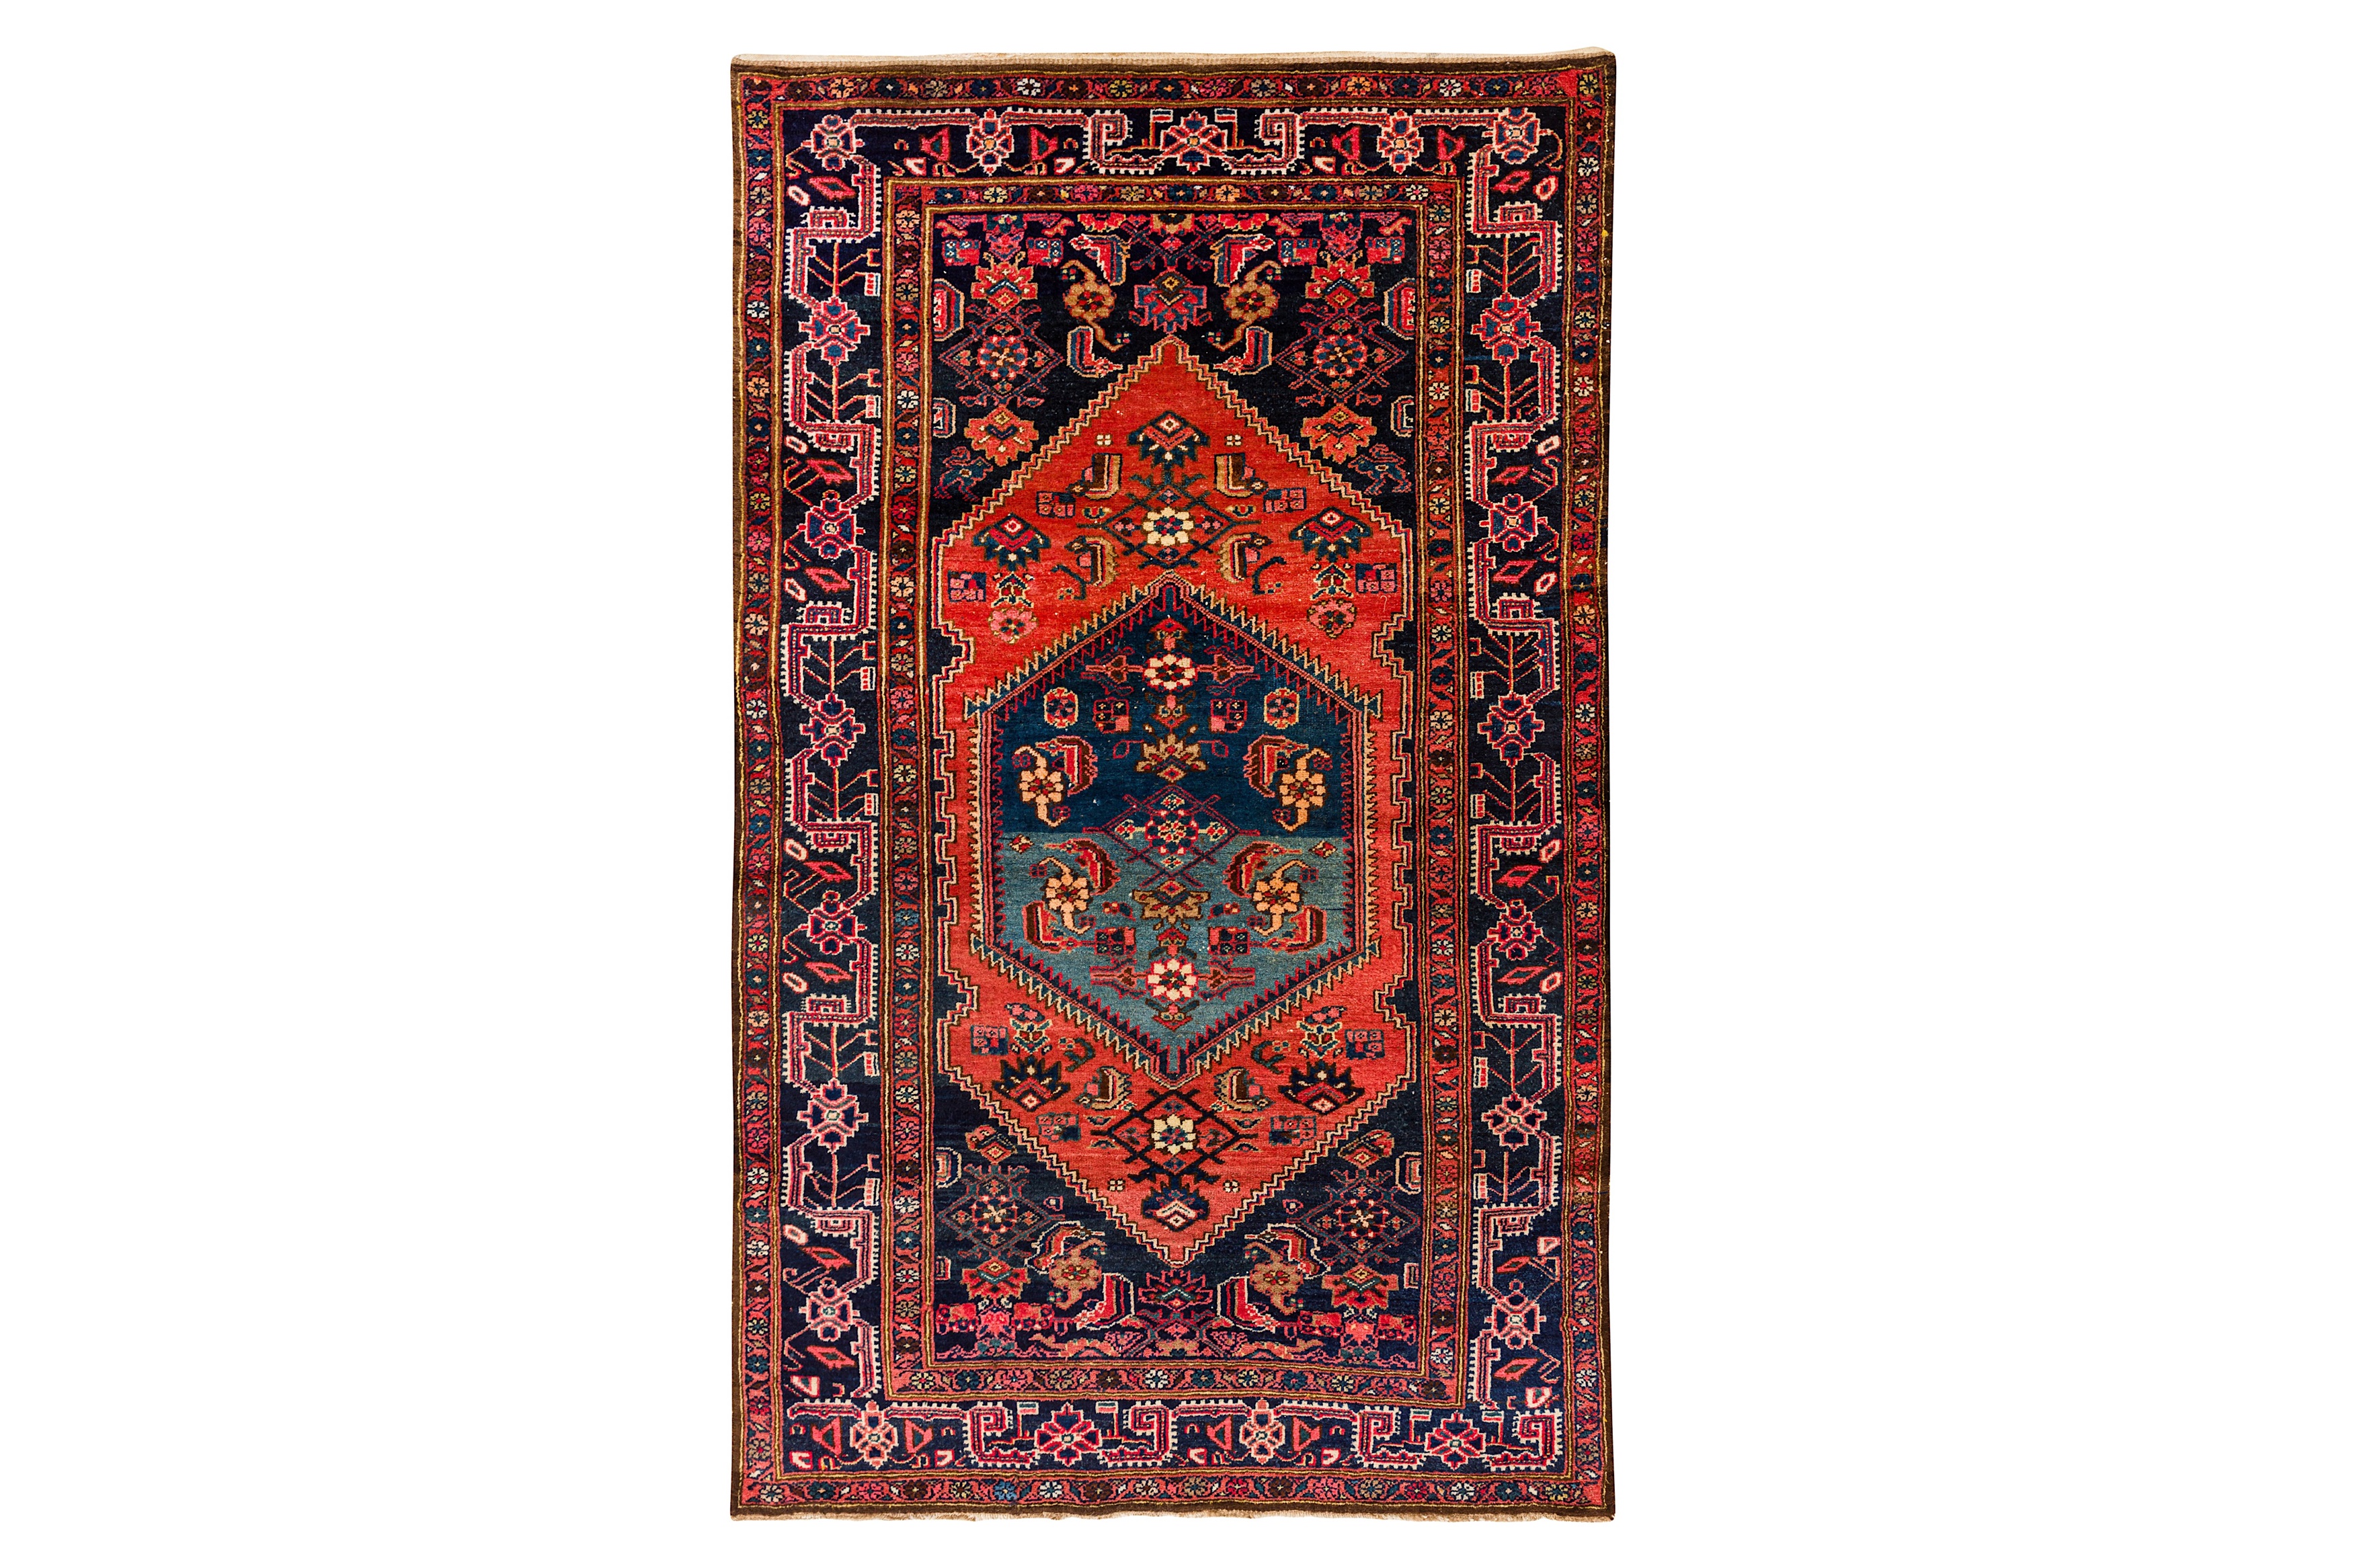 A FINE WEST PERSIAN RUG